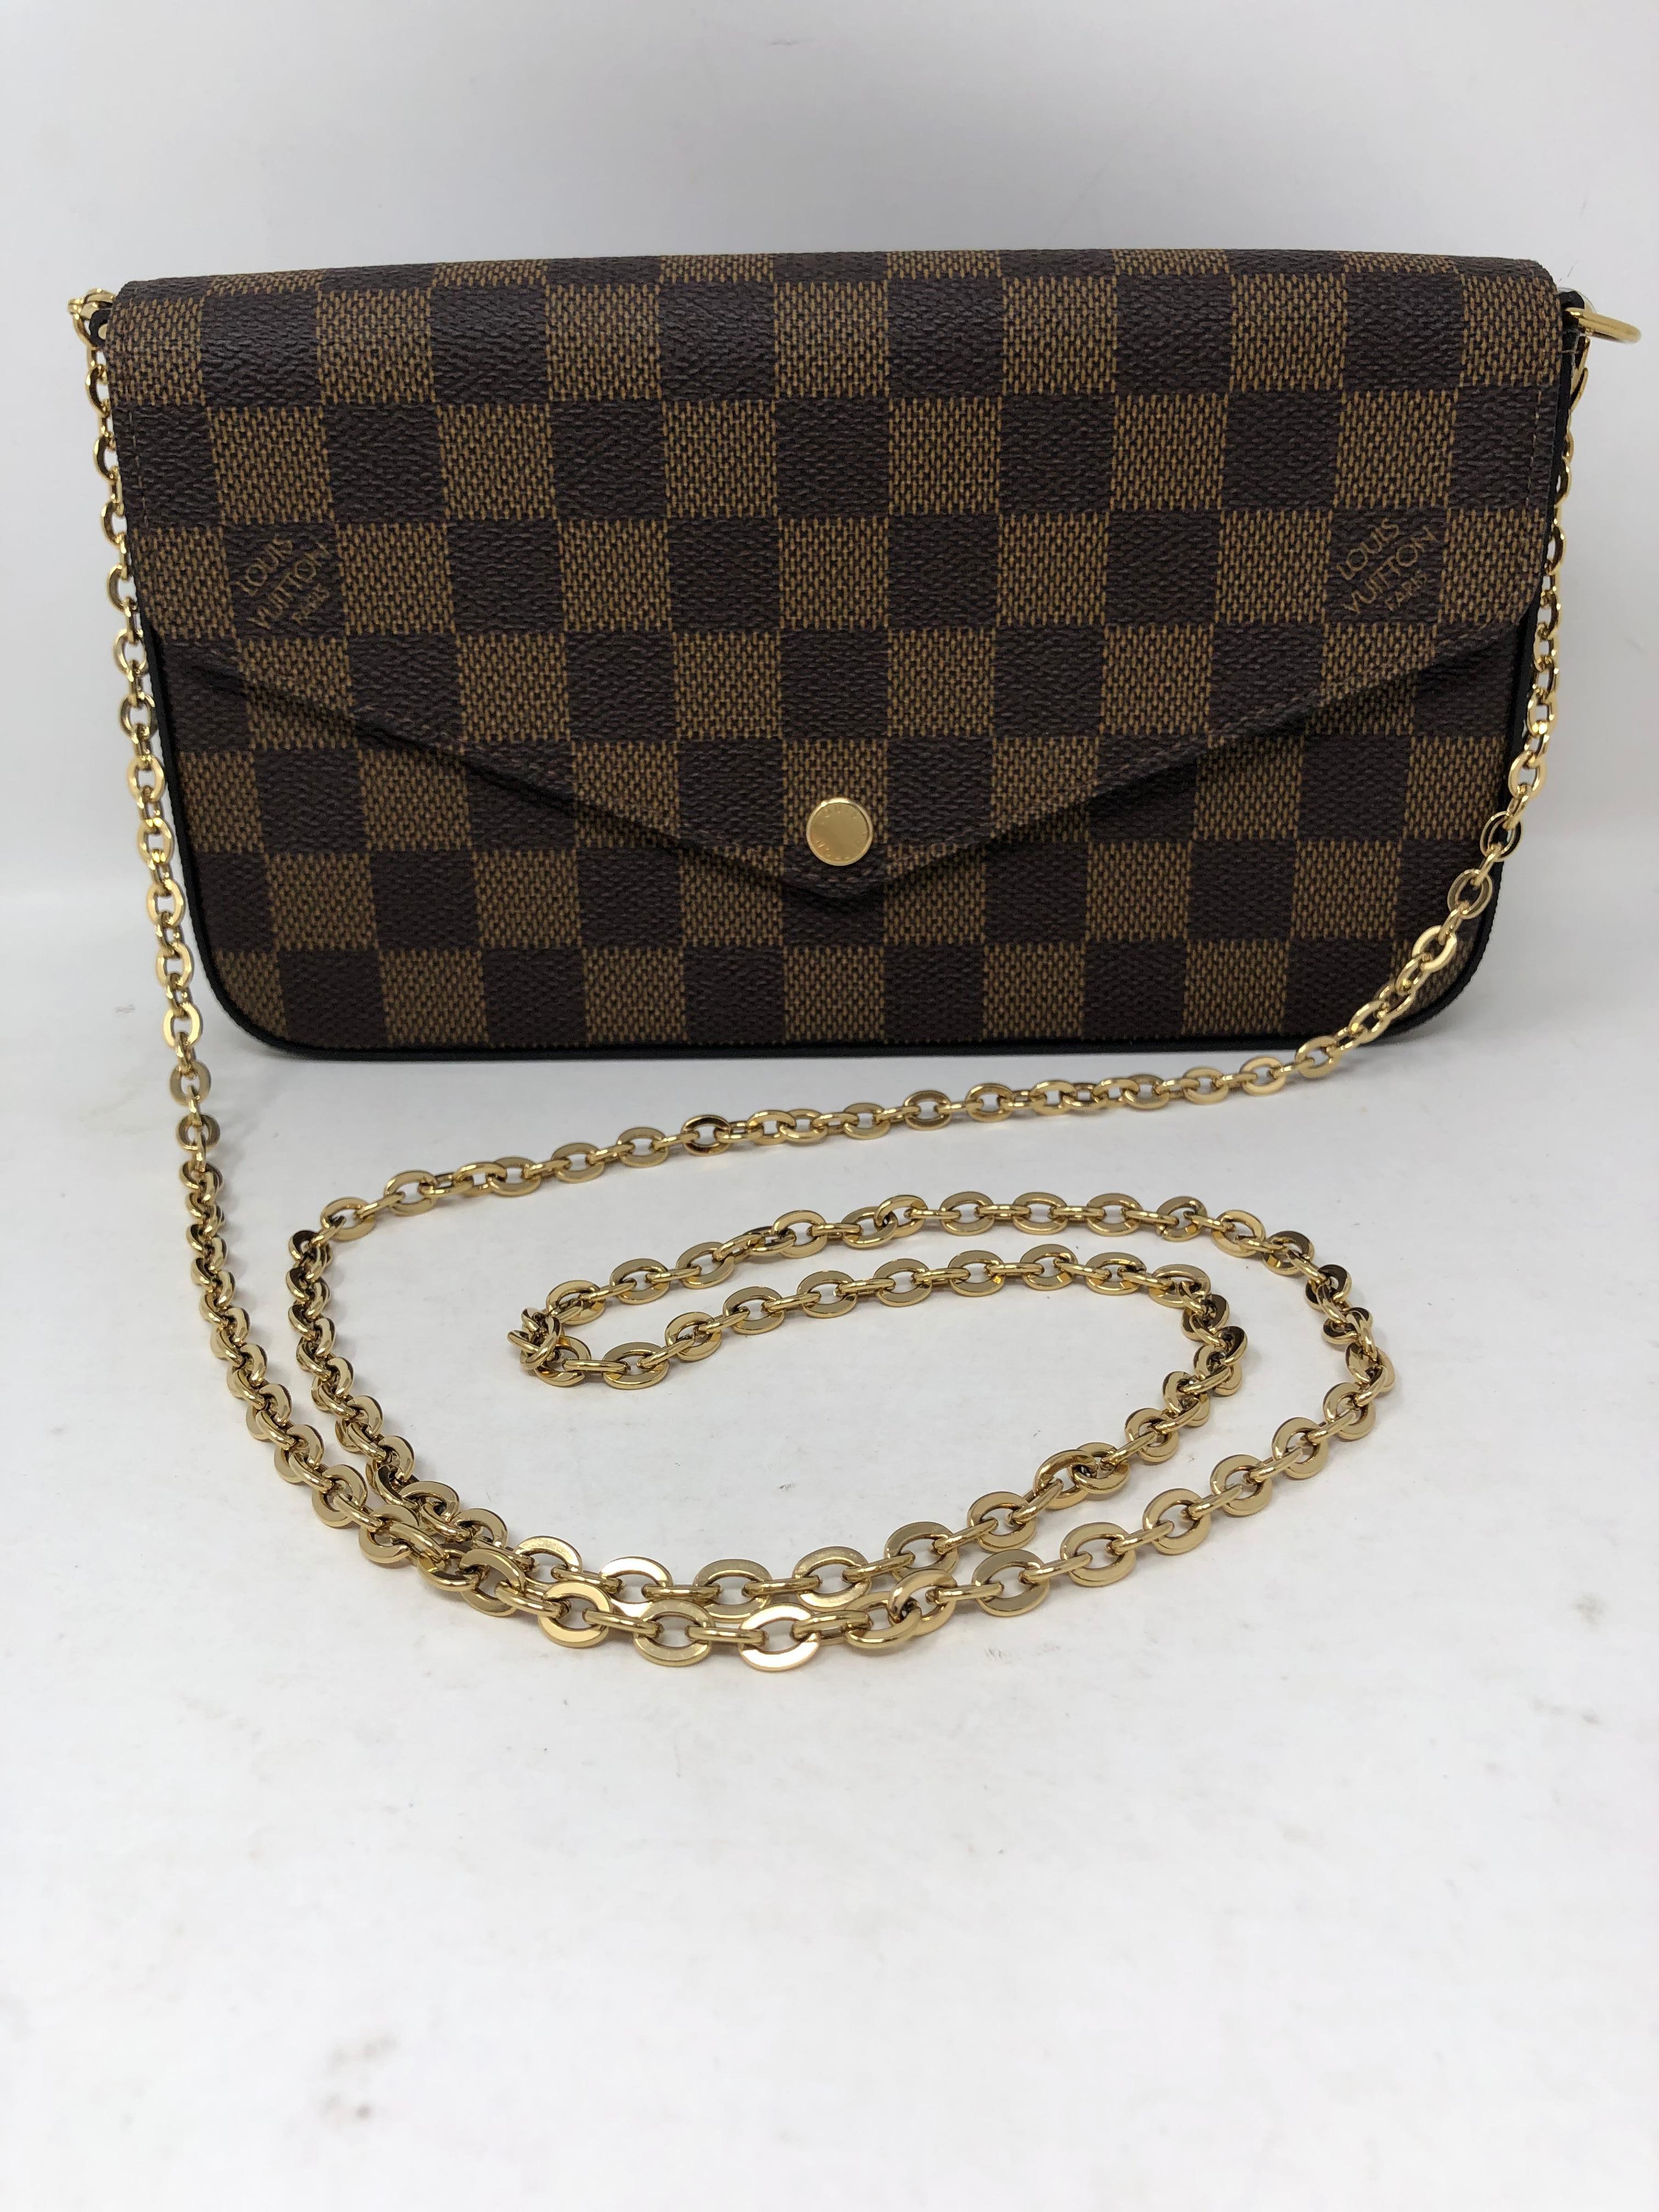 Louis Vuitton Felicie Damier Ebene Crossbody Bag. Bag can be worn as a clutch or with strap. Red interior. Never worn, new condition. Guaranteed authentic. 